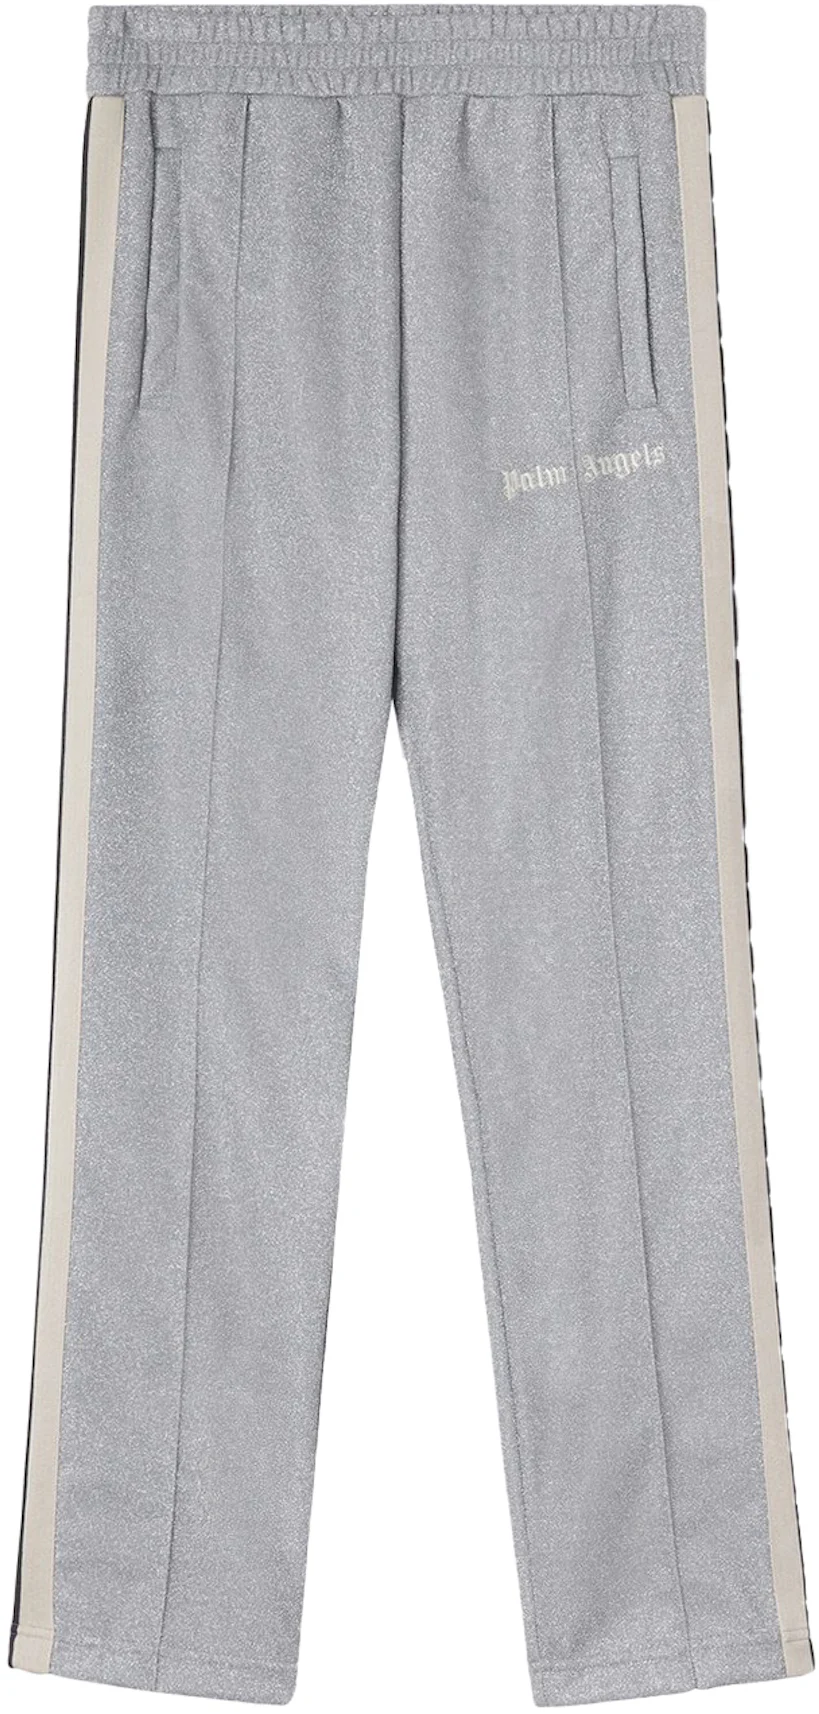 Striped Lurex Knit Logo Pants in white - Palm Angels® Official